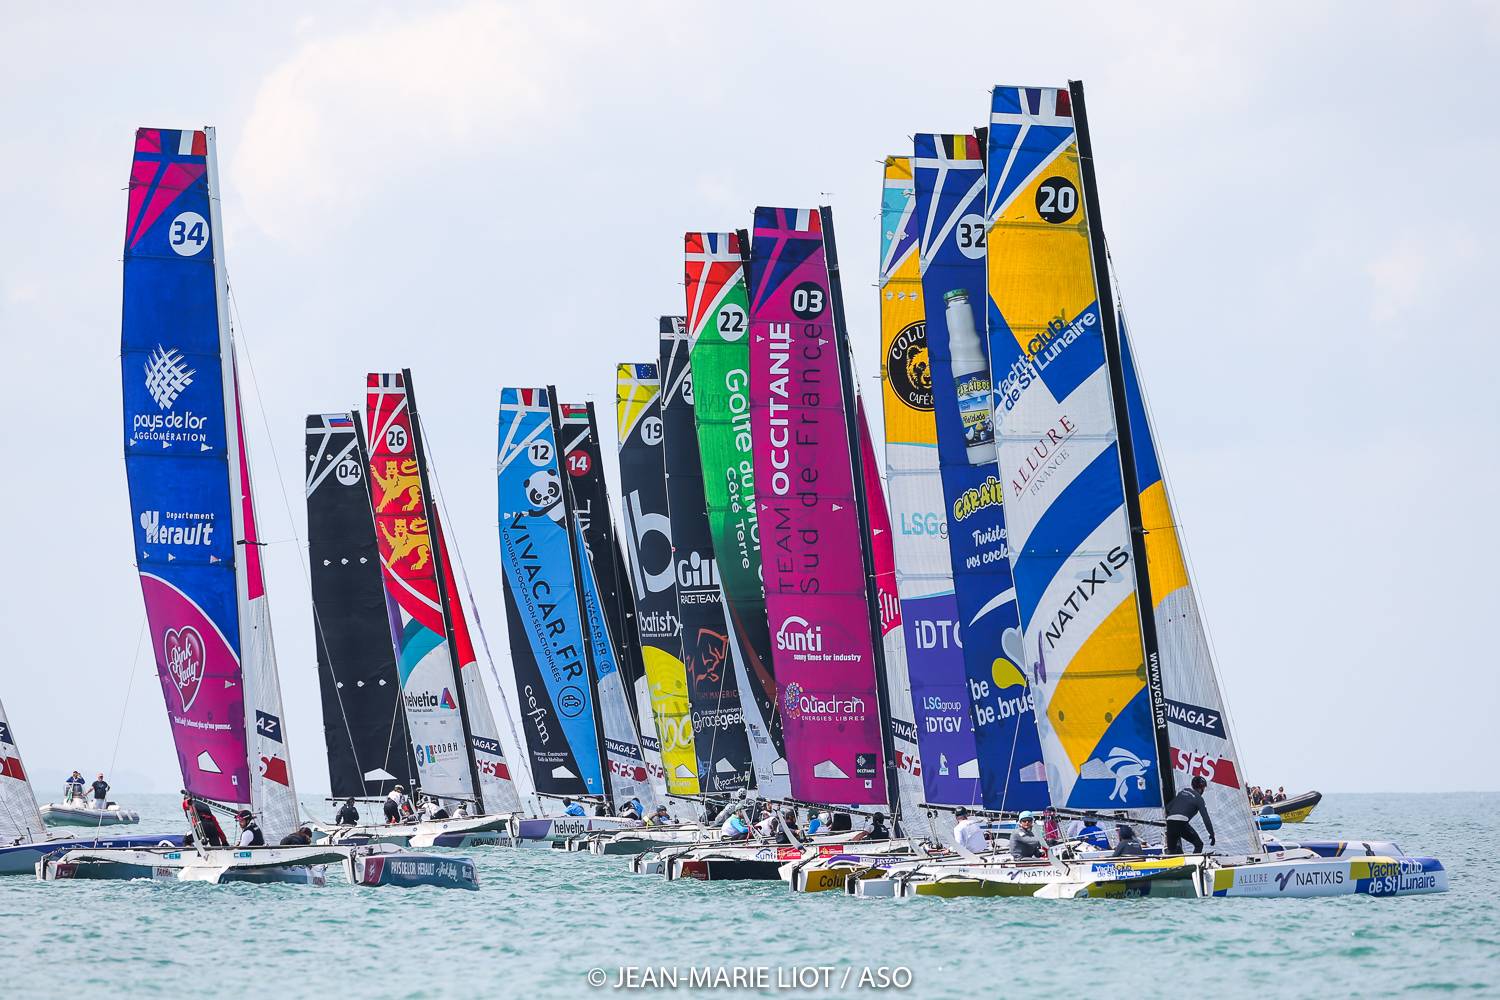  Diam 24  Tour de France à la Voile  Act 3  Jullouville FRA Day 6, no change on top of rankings on day one of Act 3, the Swiss